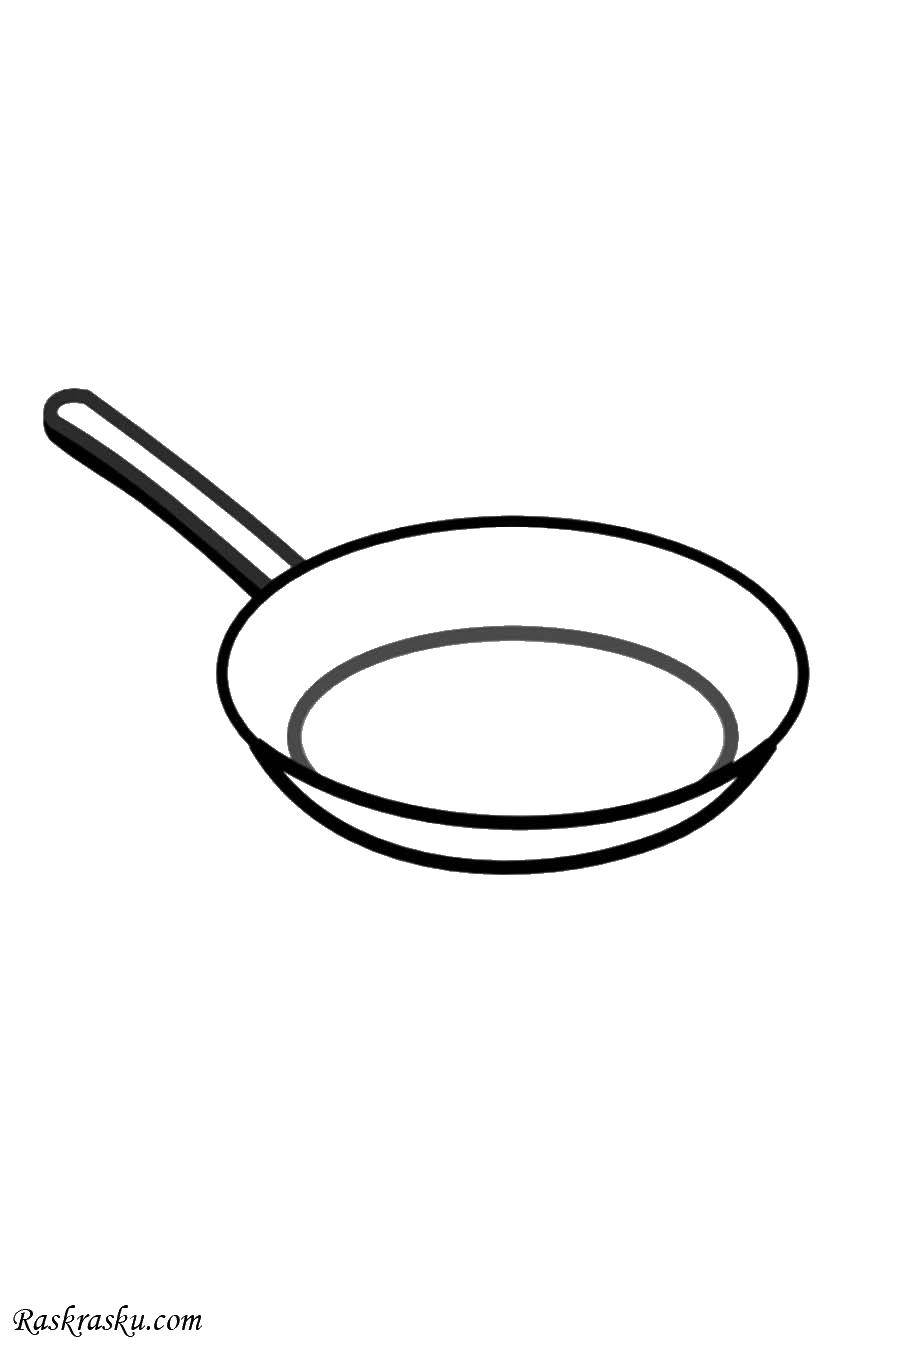 Coloring Pan. Category dishes. Tags:  frying pan, handle.